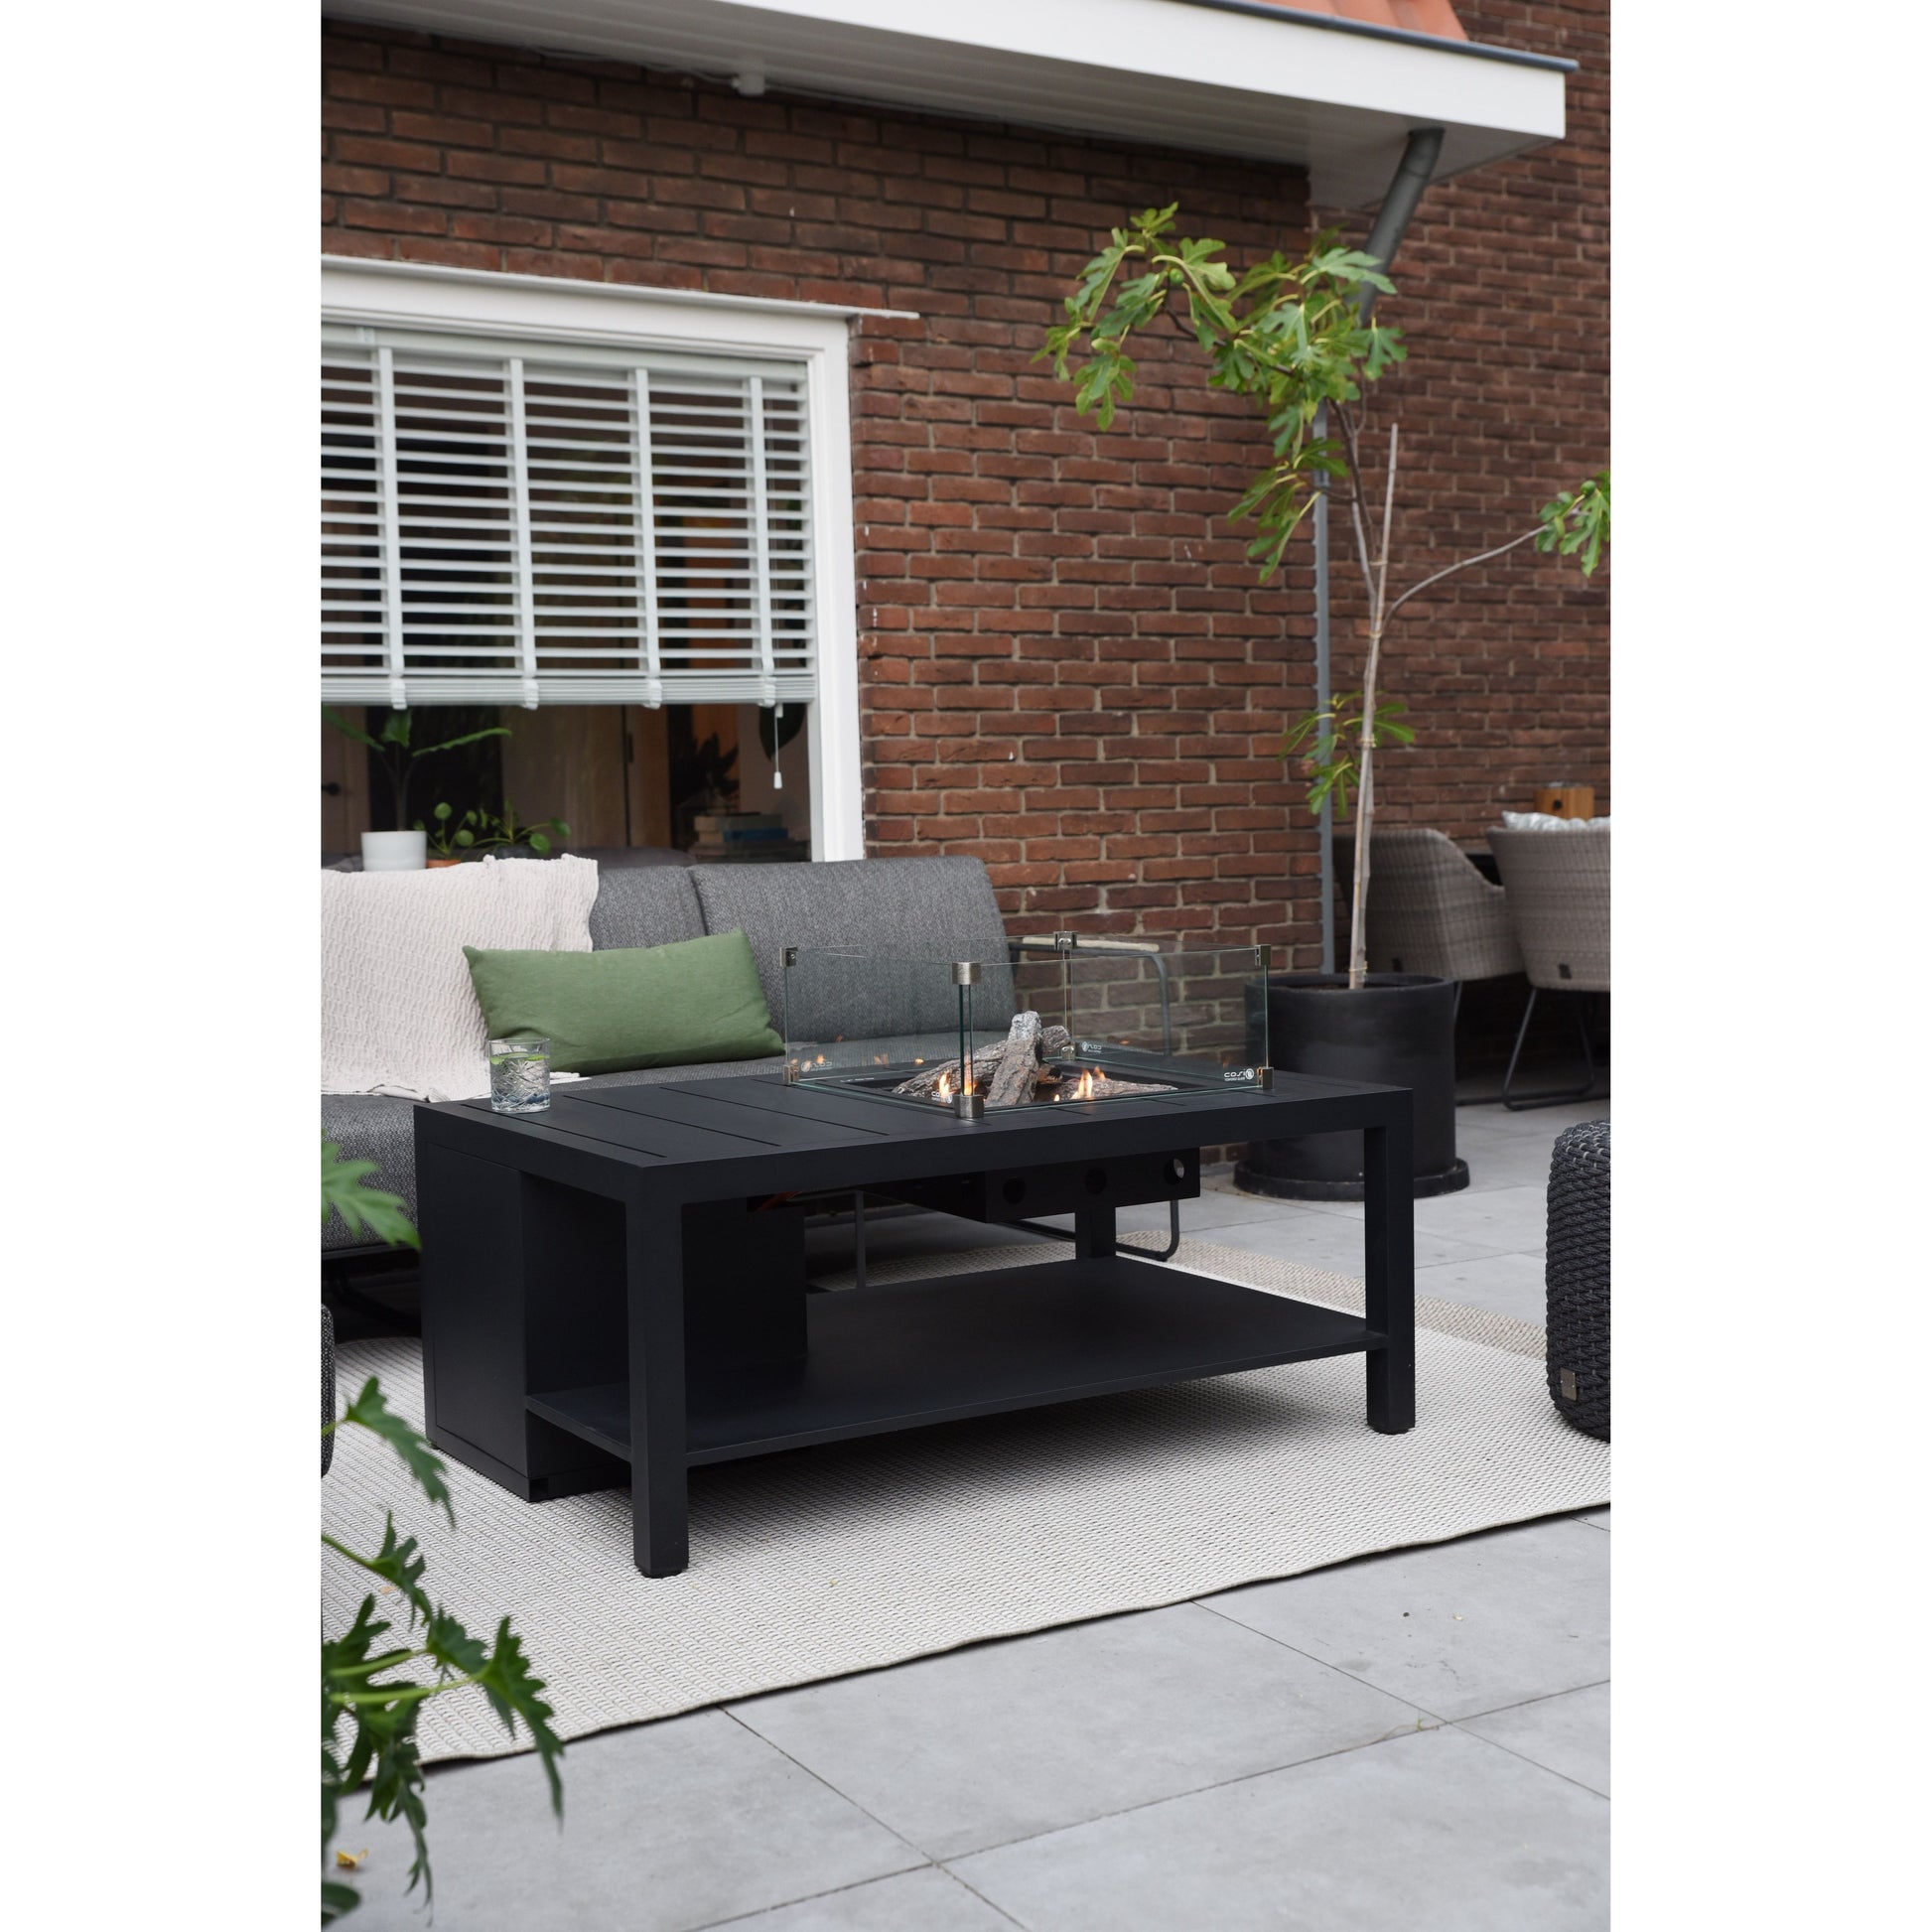 Cosi - Cosiflow 120 Rectangular Anthracite Fire Pit Table - Timeout Gardens